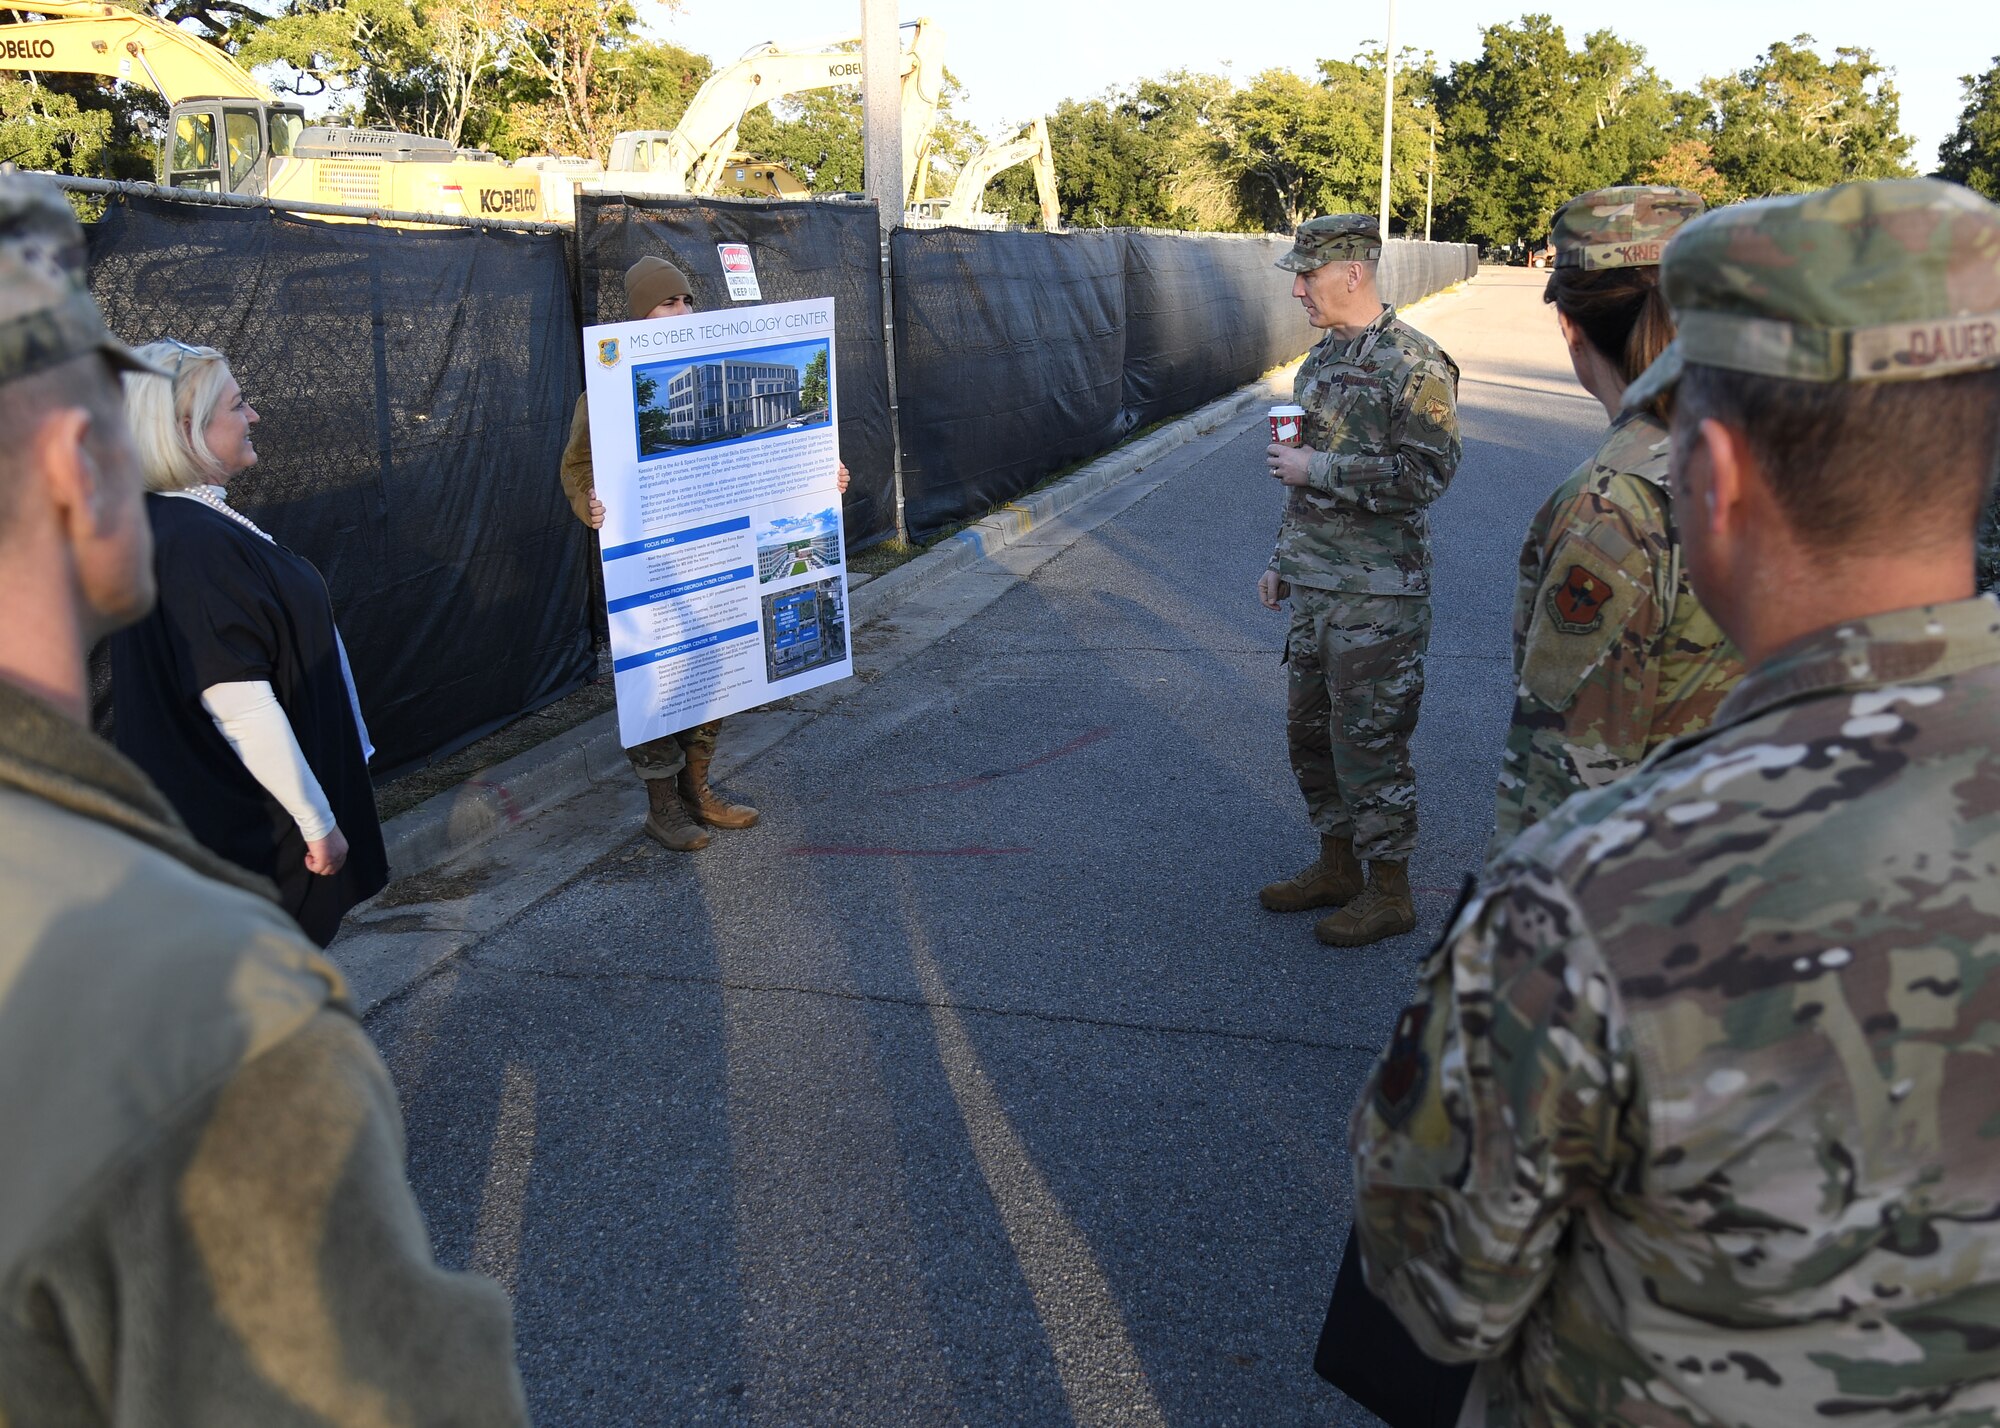 U.S. Air Force Gen. David Allvin, Vice Chief of Staff of the Air Force, tours the proposed site for the new Cyber Center at Keesler Air Force Base, Mississippi, Nov. 18, 2022.